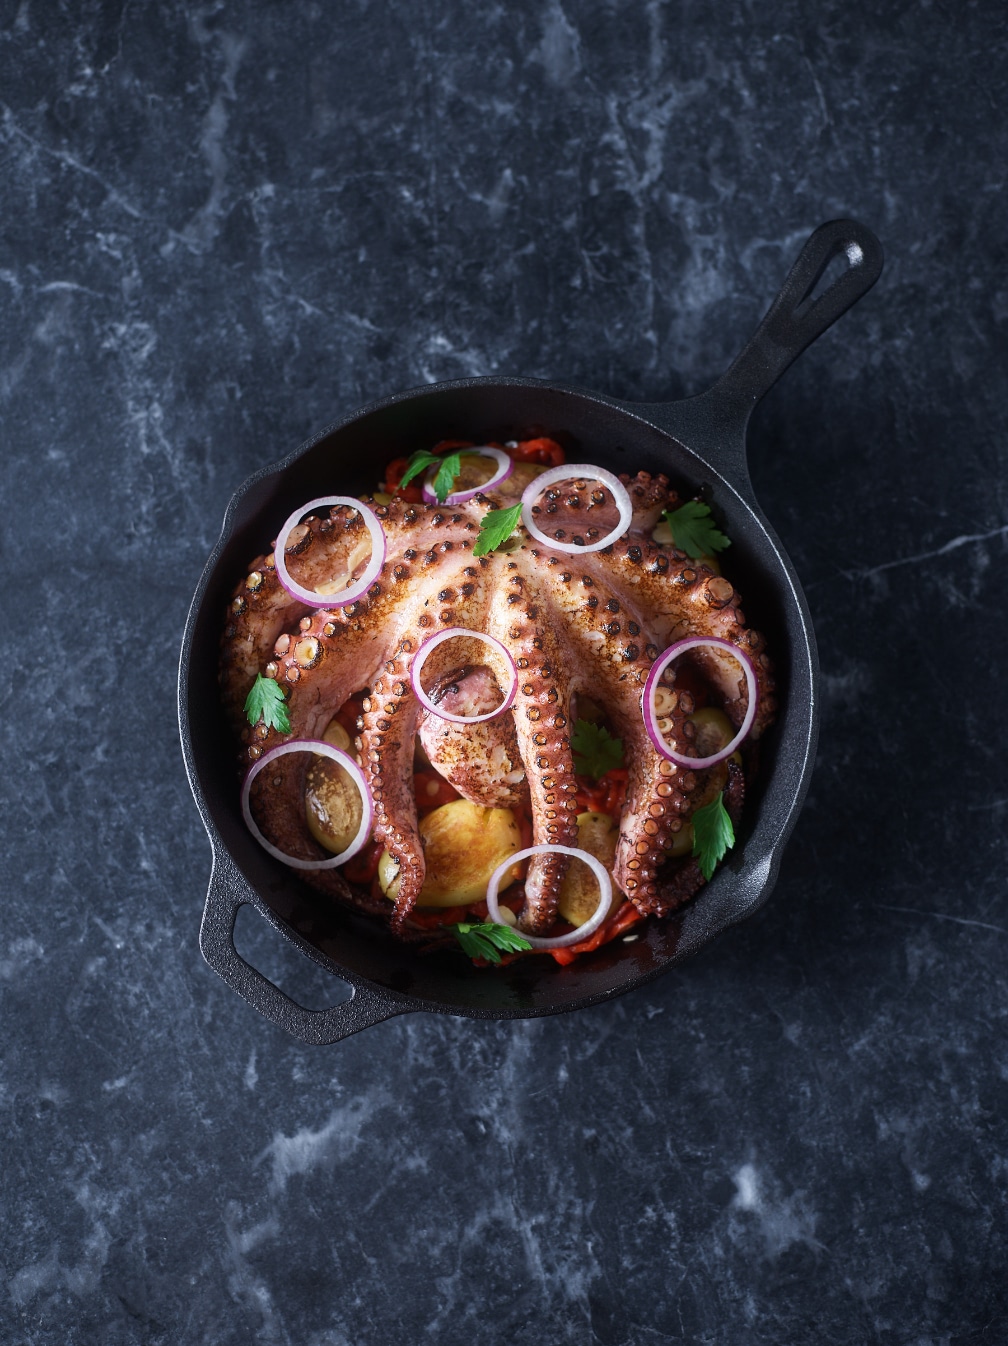 A bowl viewed from above. The bowl contains cooked octopus on a bed of potatoes and other vegetables, topped with rings of raw red onion.